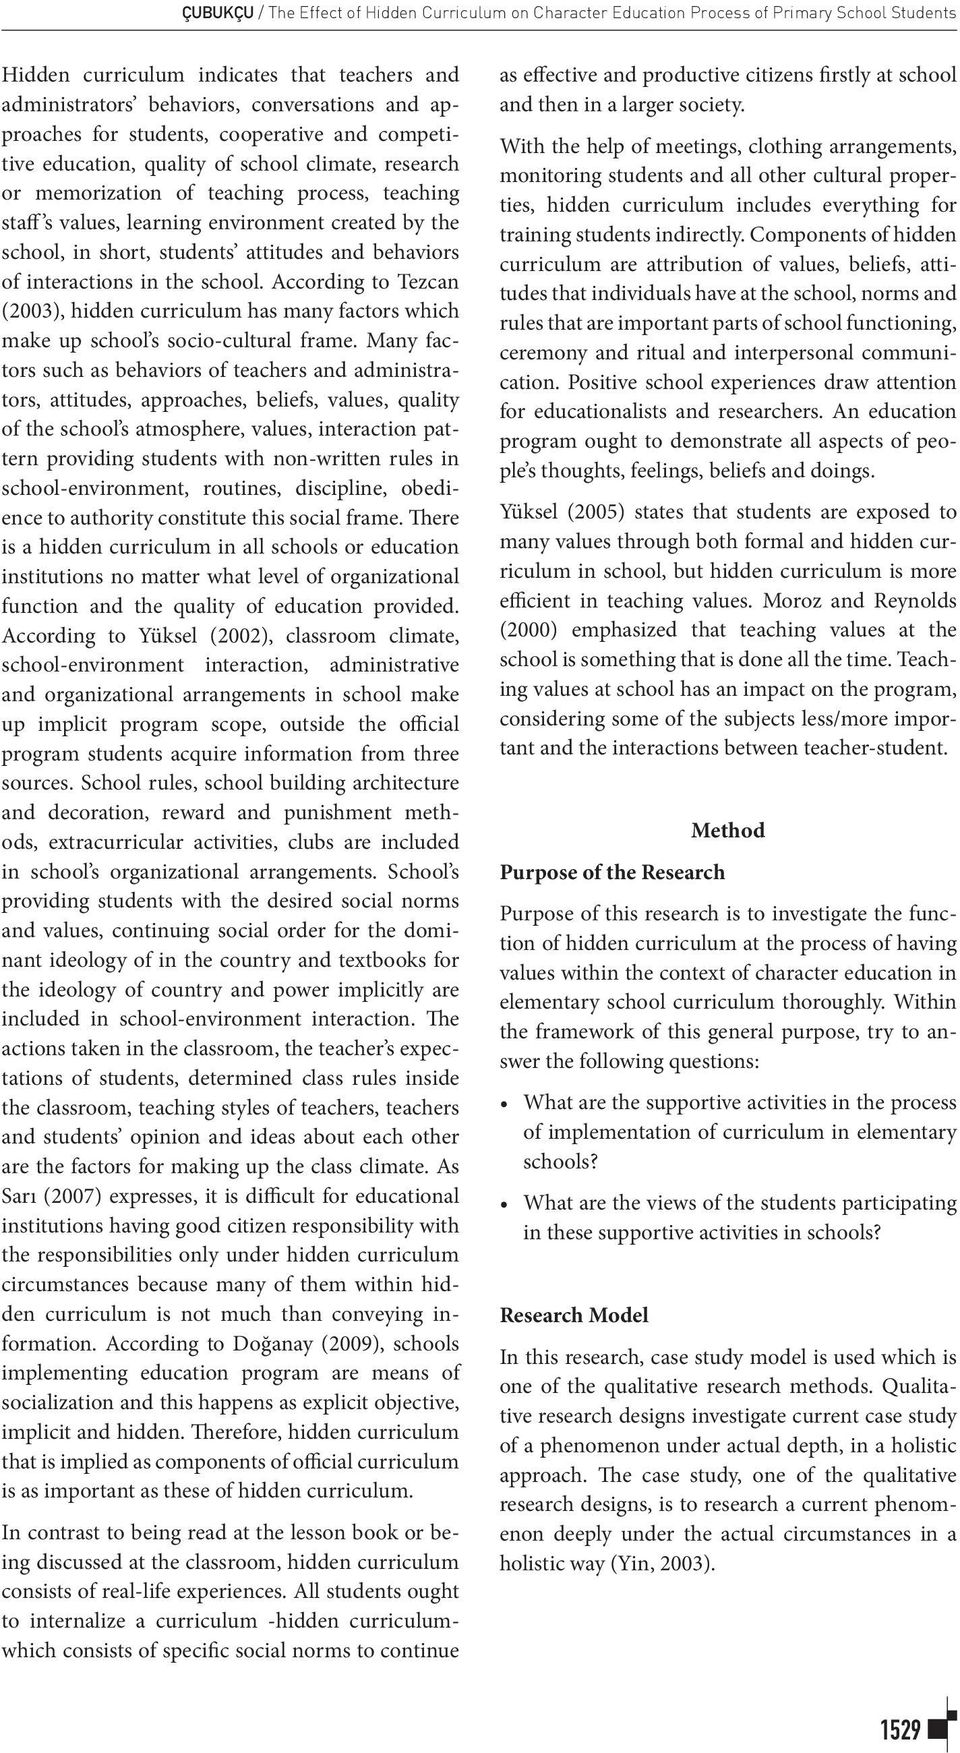 school, in short, students attitudes and behaviors of interactions in the school. According to Tezcan (2003), hidden curriculum has many factors which make up school s socio-cultural frame.